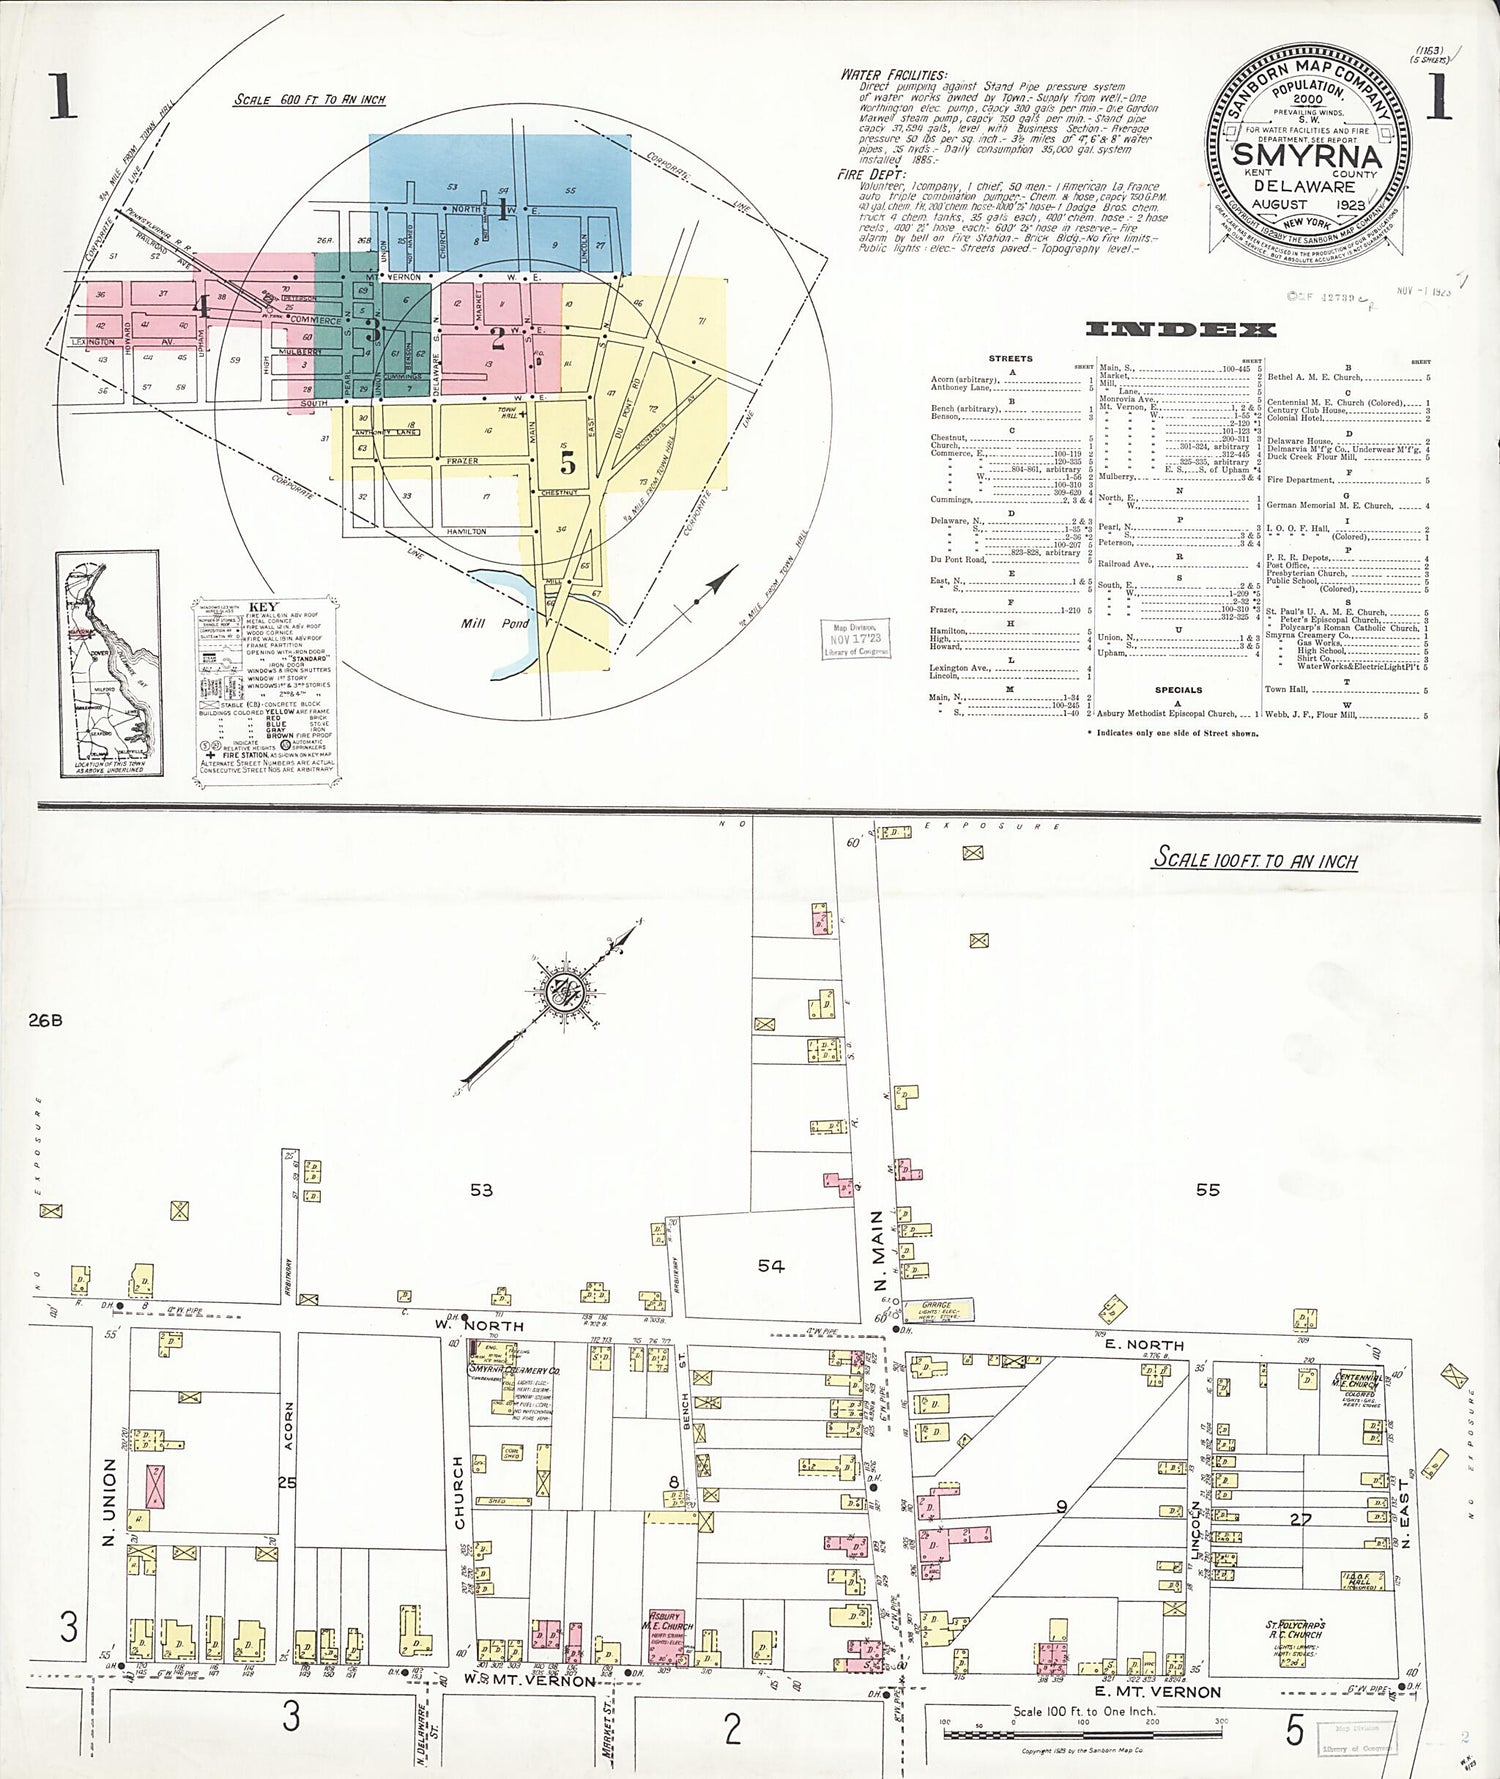 This old map of Smyrna, Kent County, Delaware was created by Sanborn Map Company in 1923